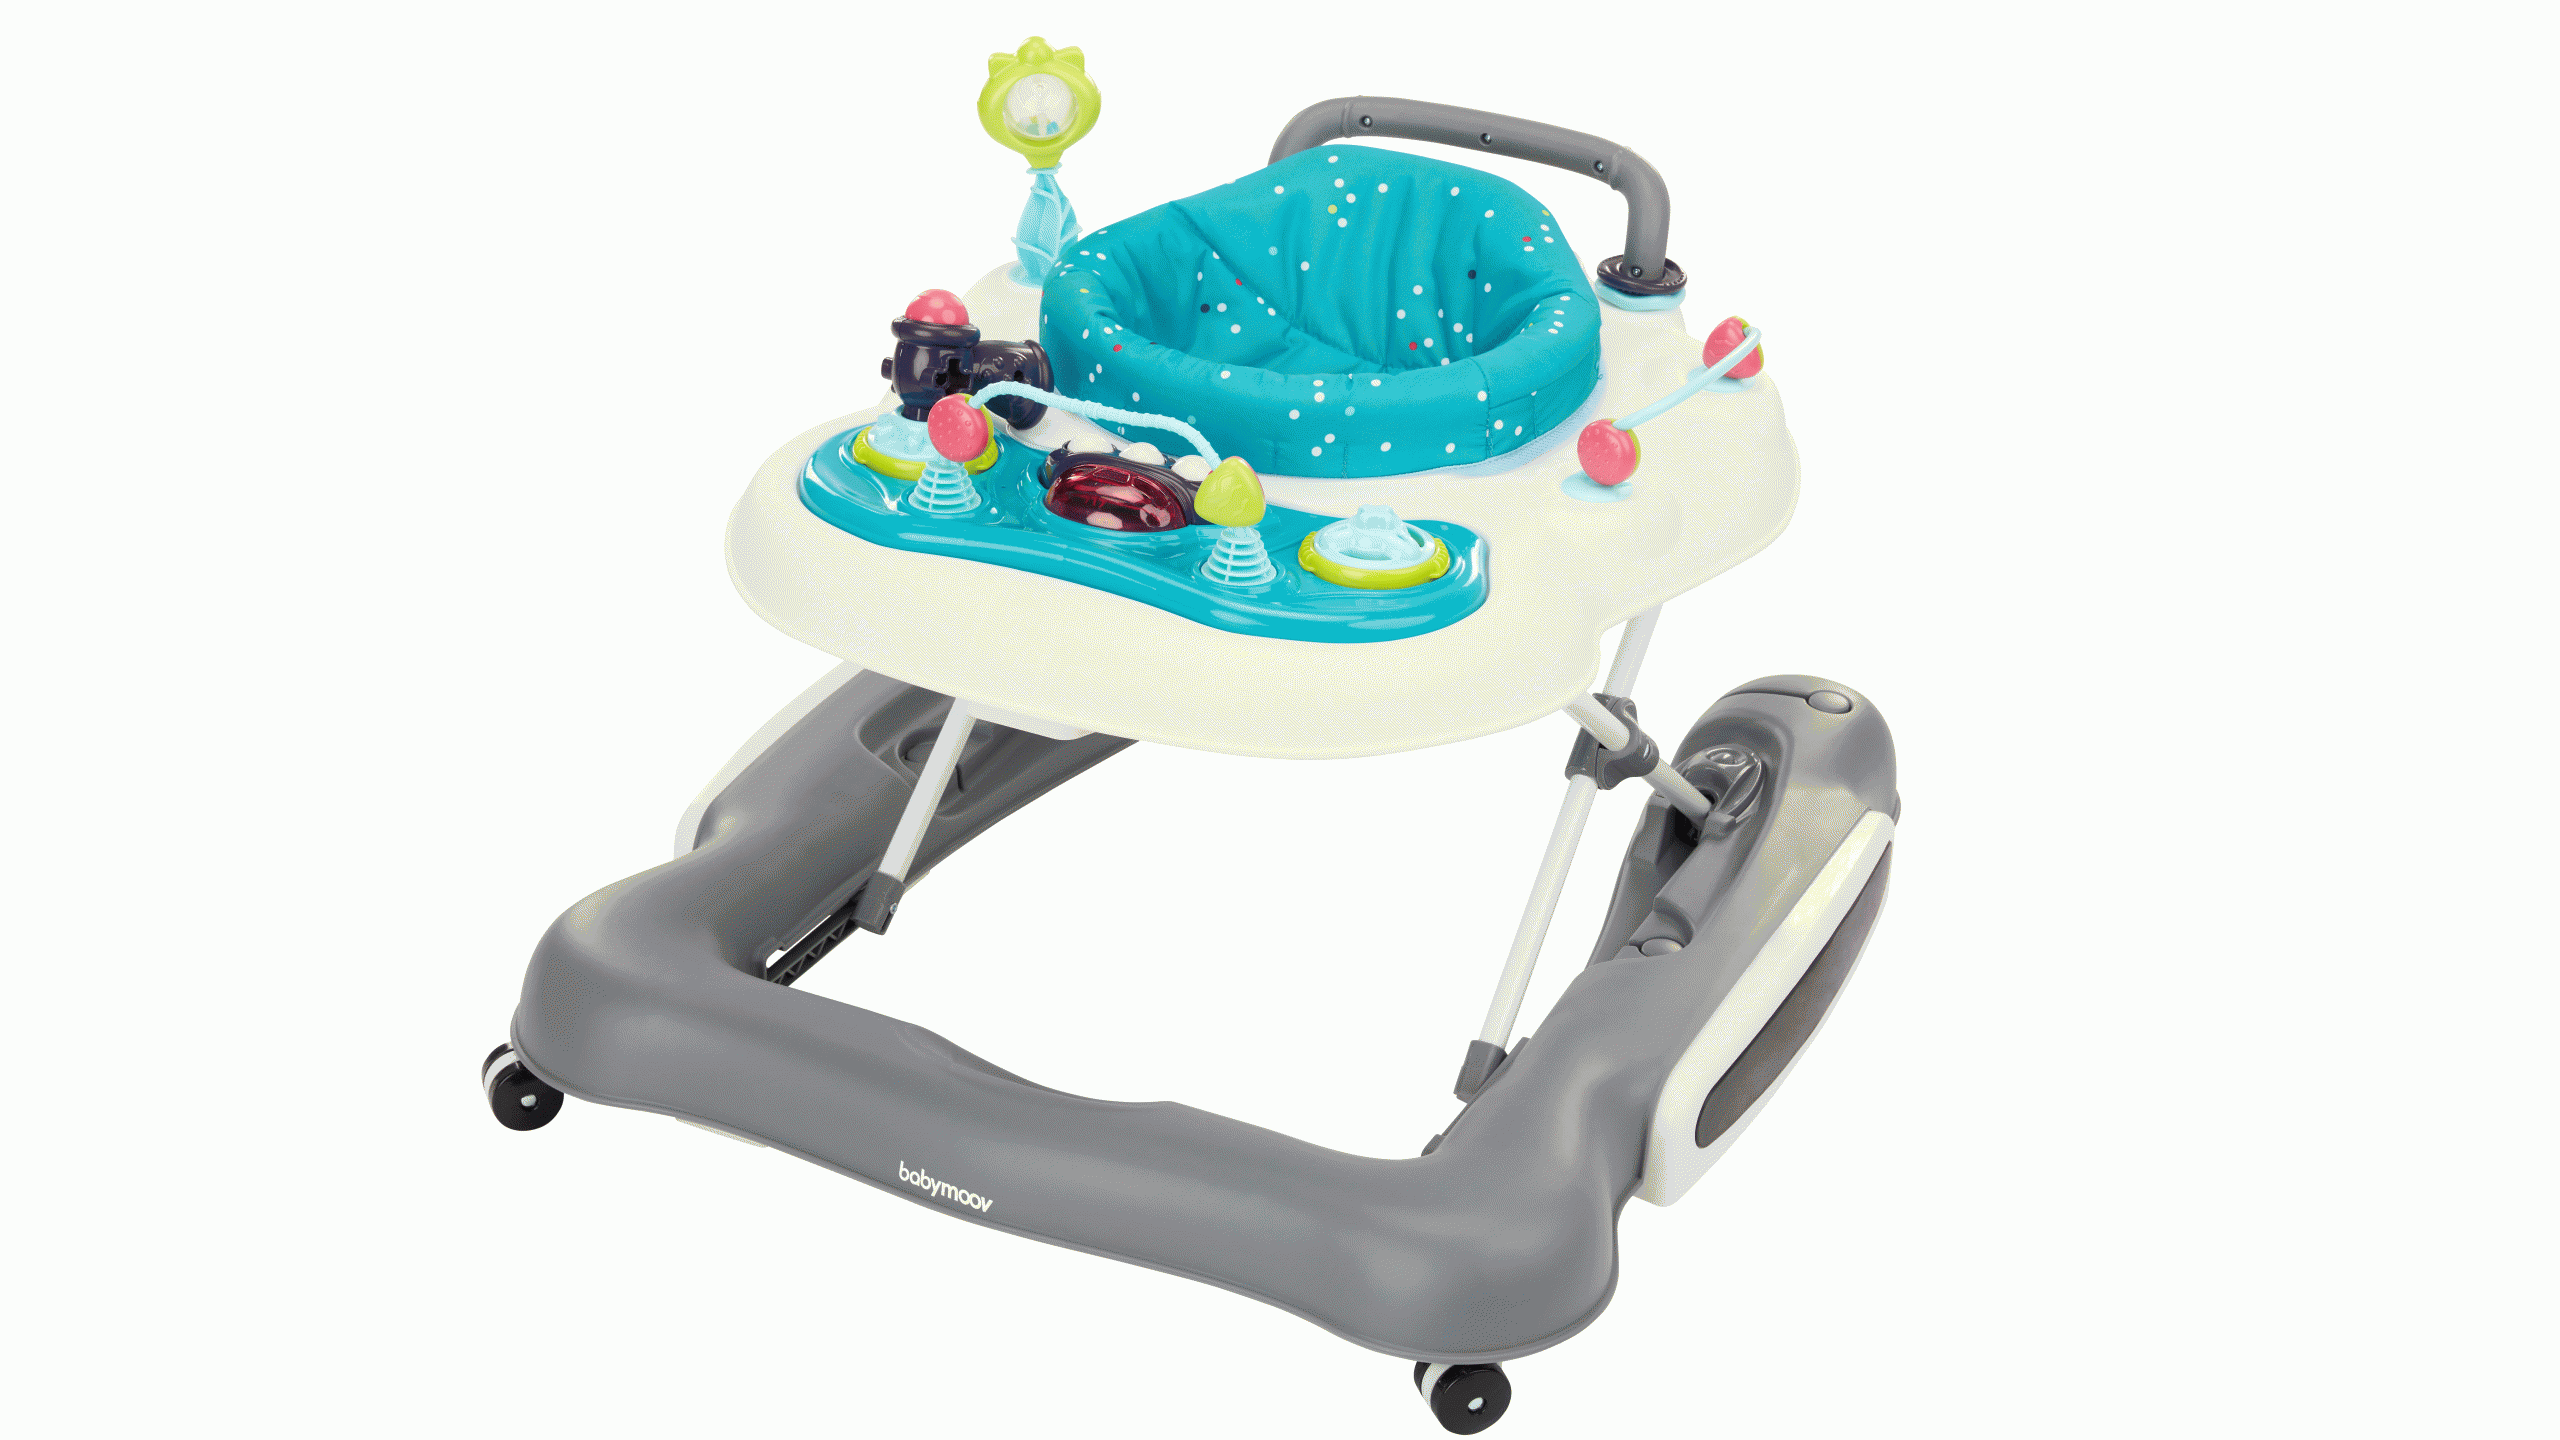 Babymoov 5-in-1 progressive walker and push toy is in our list of the best baby walkers